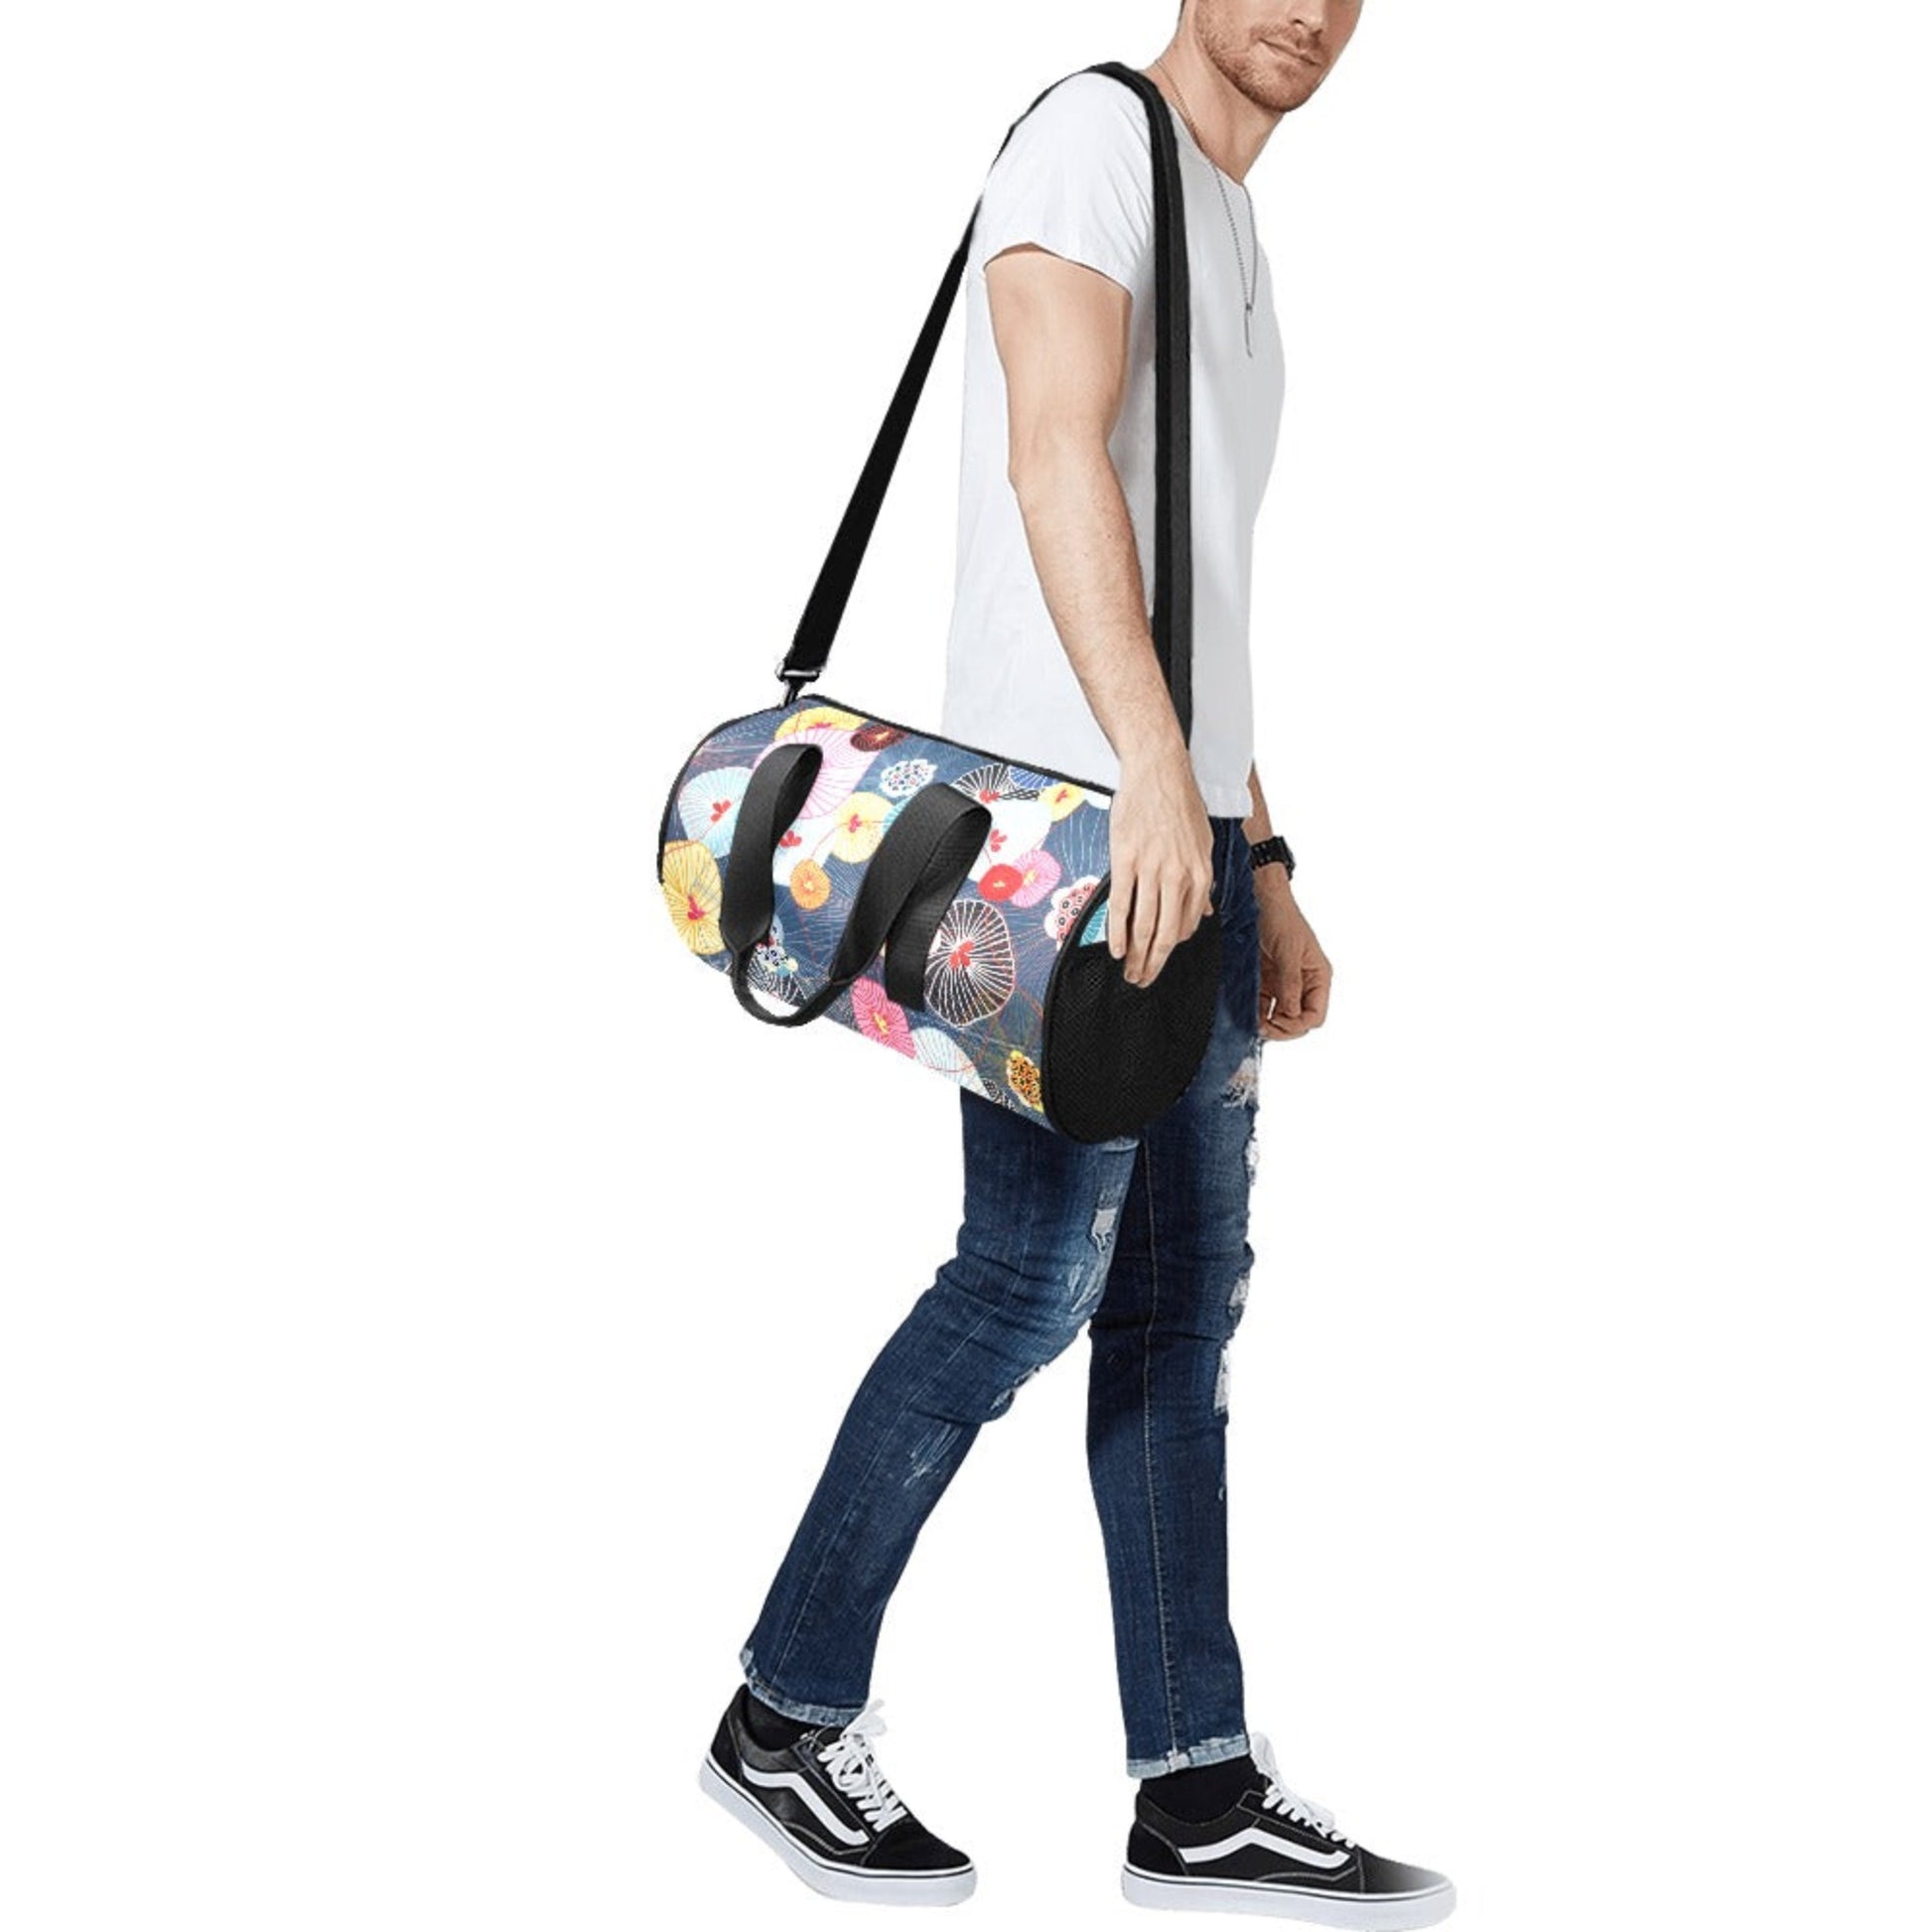 Abstract Floral - Round Duffle Bag Round Duffle Bag